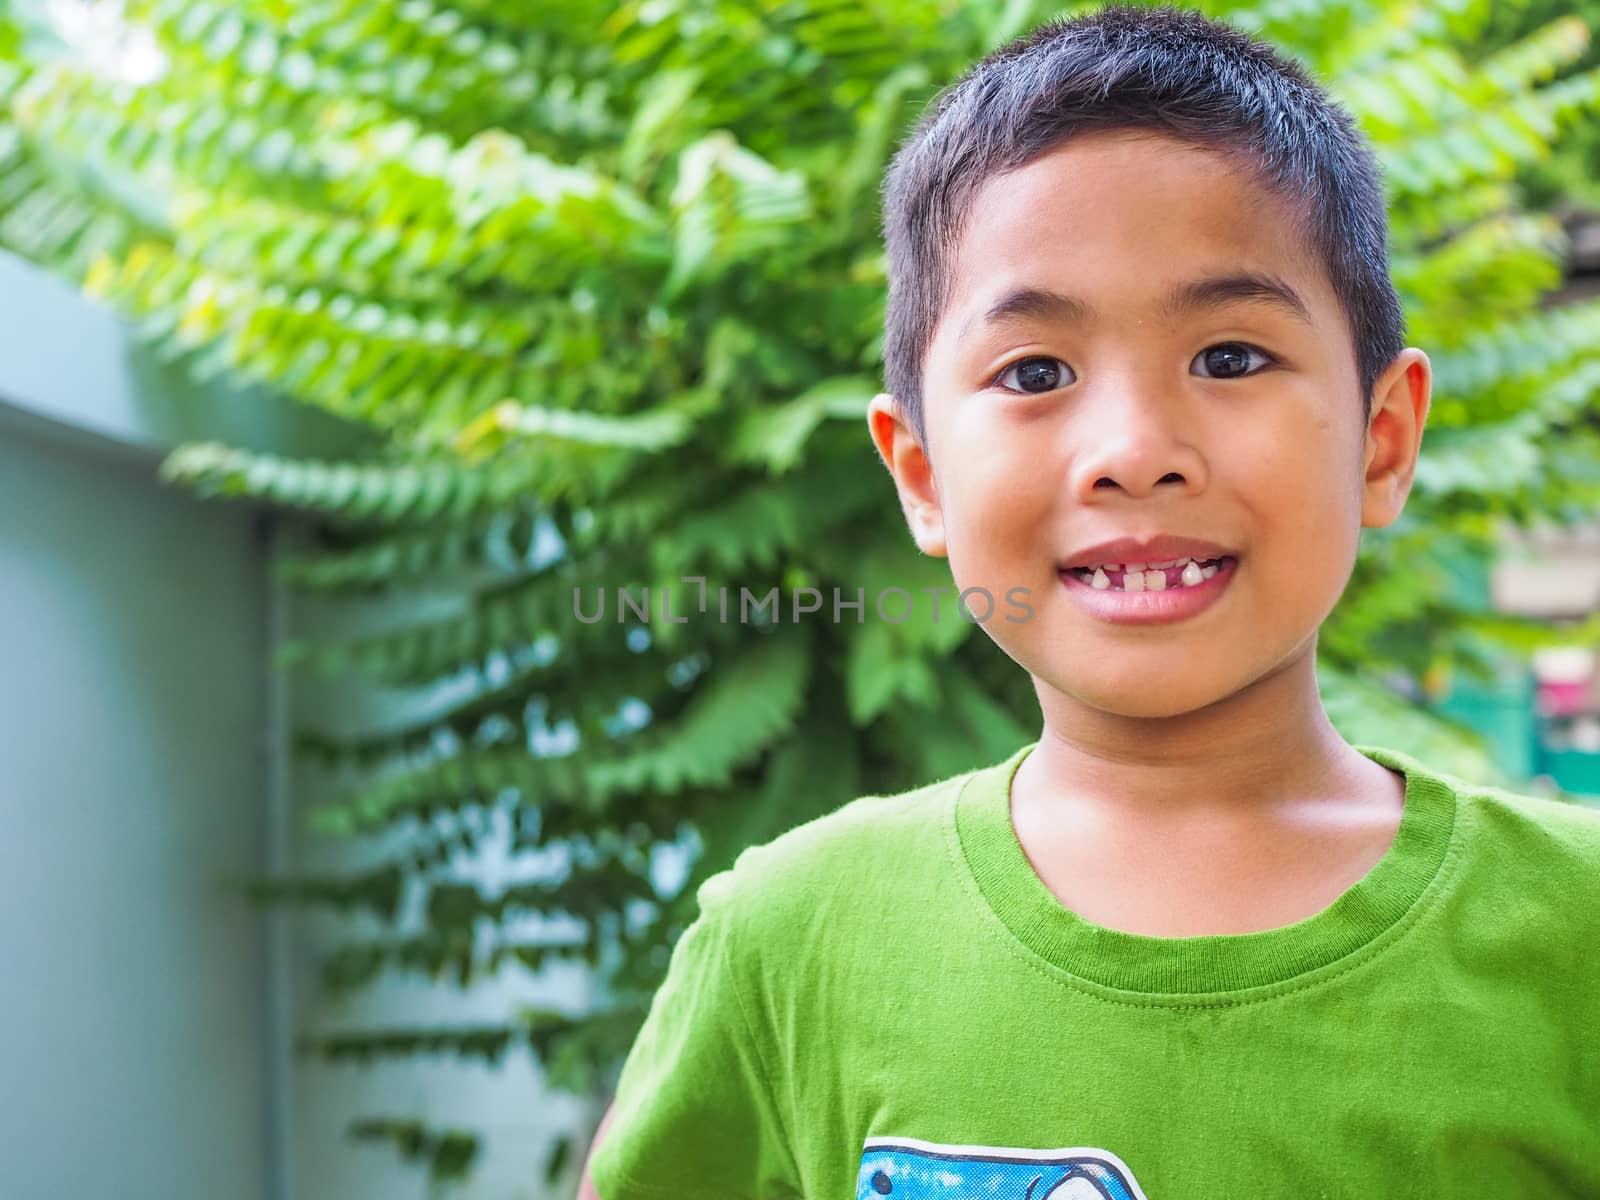 Portrait of a boy Wearing a green shirt With a green tree backgr by Unimages2527